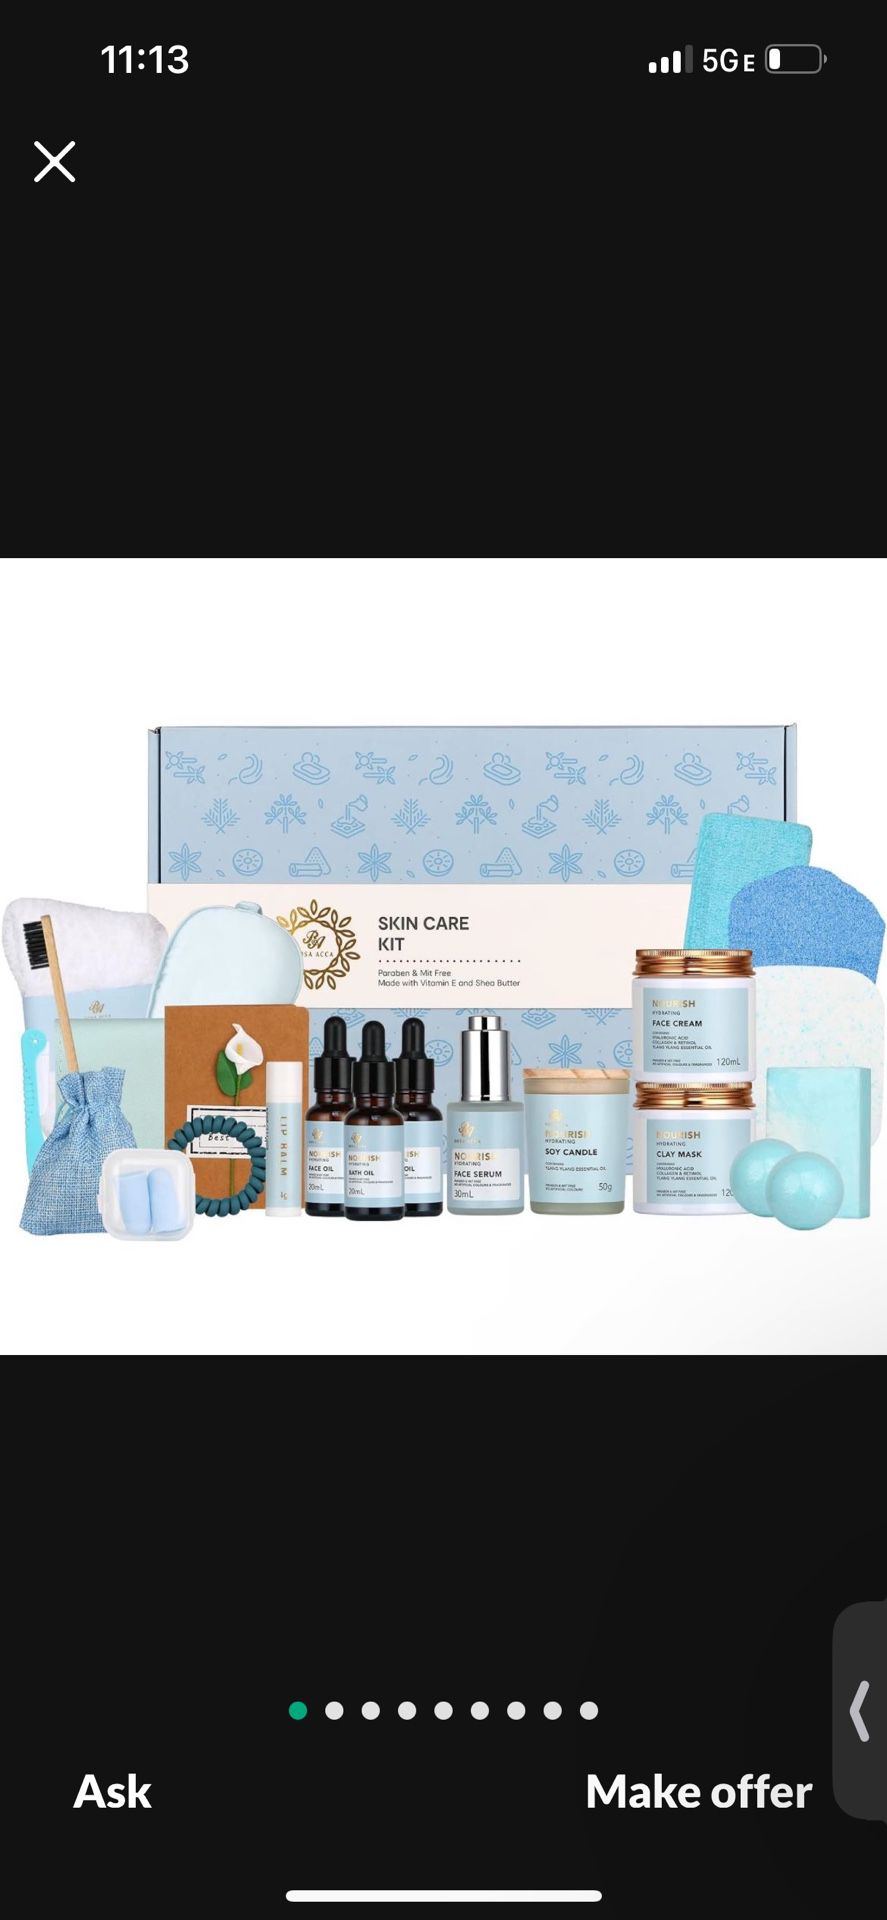 Facial Skin Care Set & Bath Spa Kit, Bath and Body Spa Kit, Mothers Day Gifts, Self-care Gift, Christmas Birthday Gifts for Women, Skin Care, Hyaluron